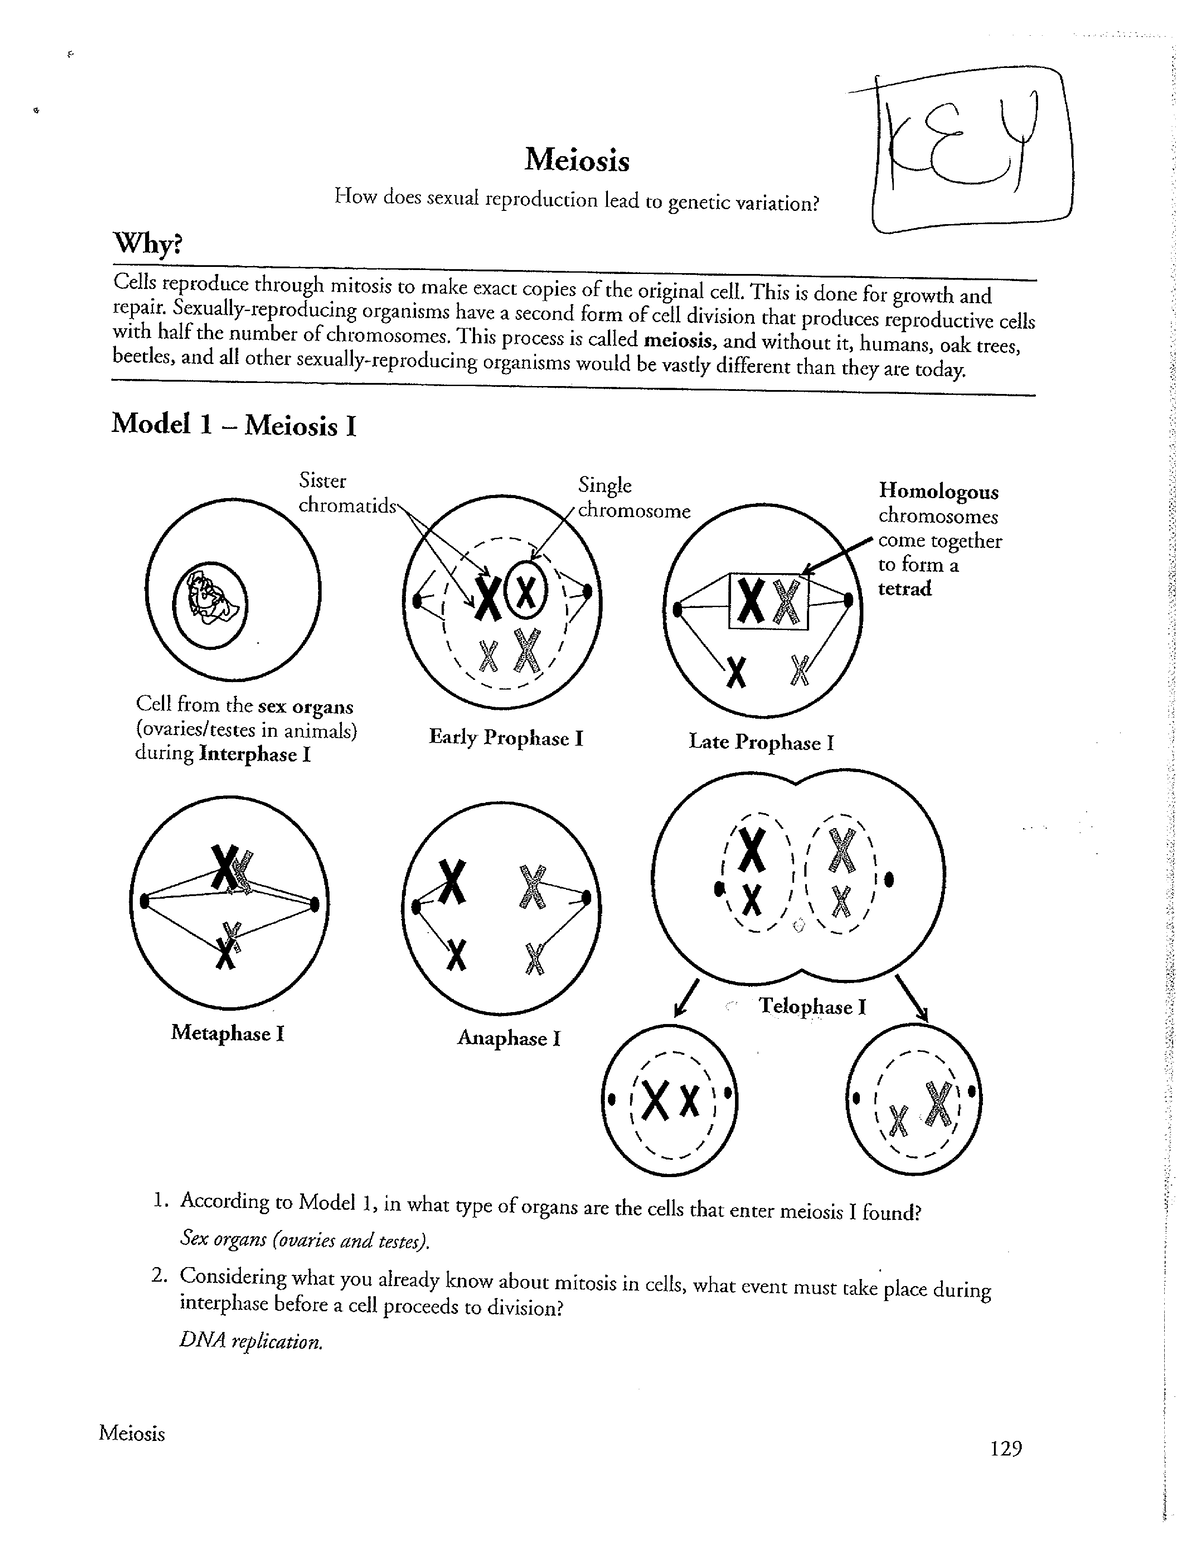 kami-export-biology-meiosis-how-does-sexual-reproduction-lead-to-genetic-variation